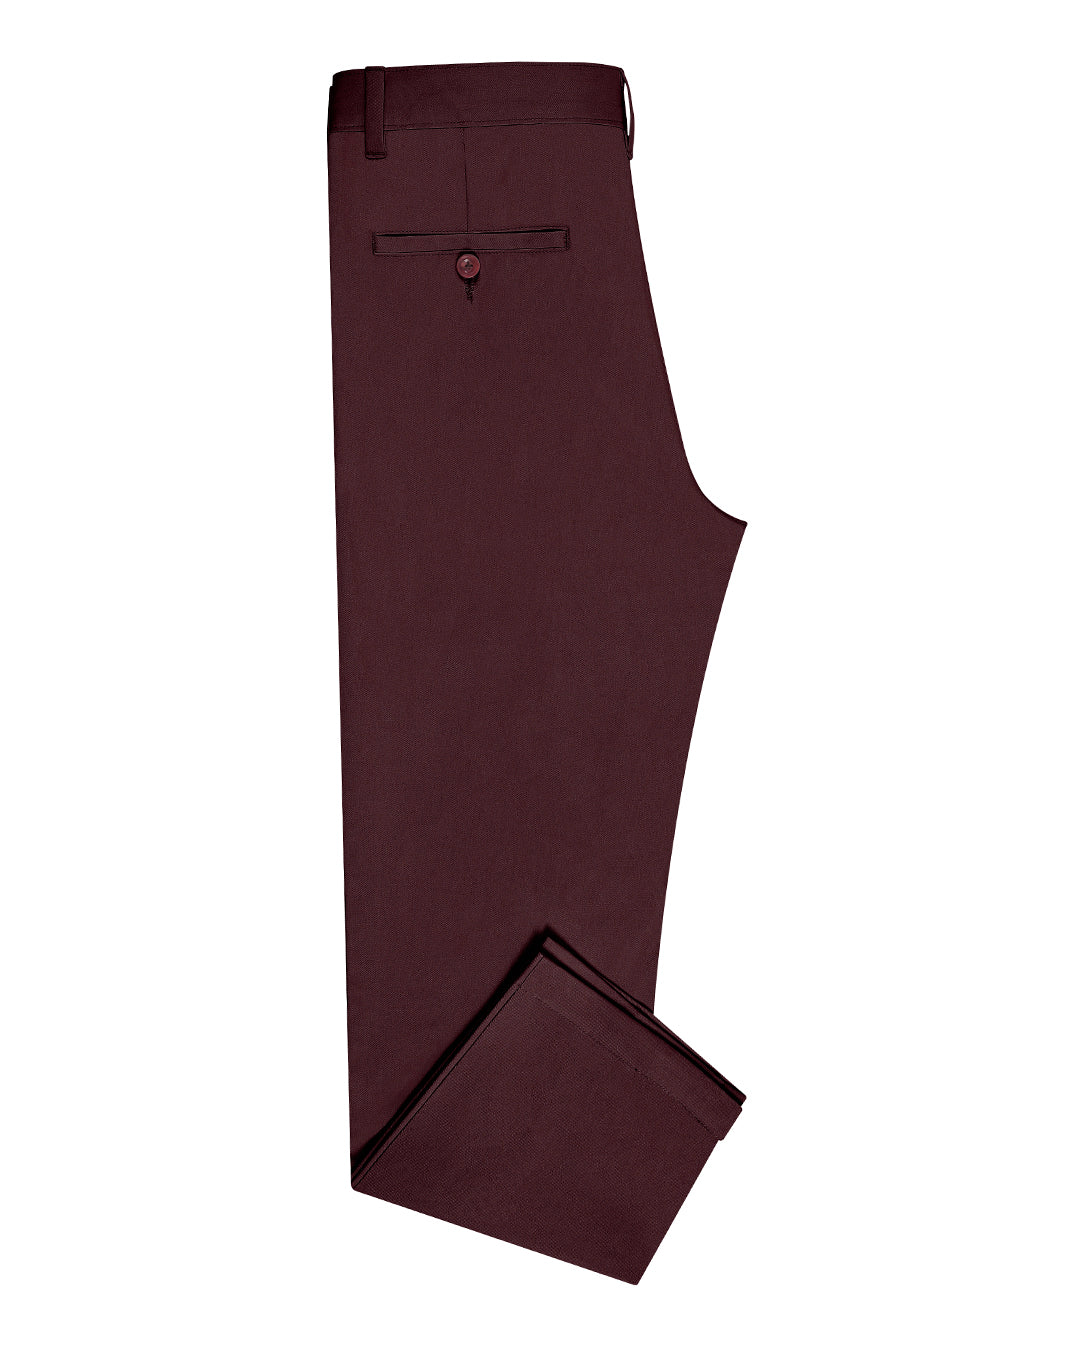 Side view of custom Genoa Chino pants for men by Luxire in plum